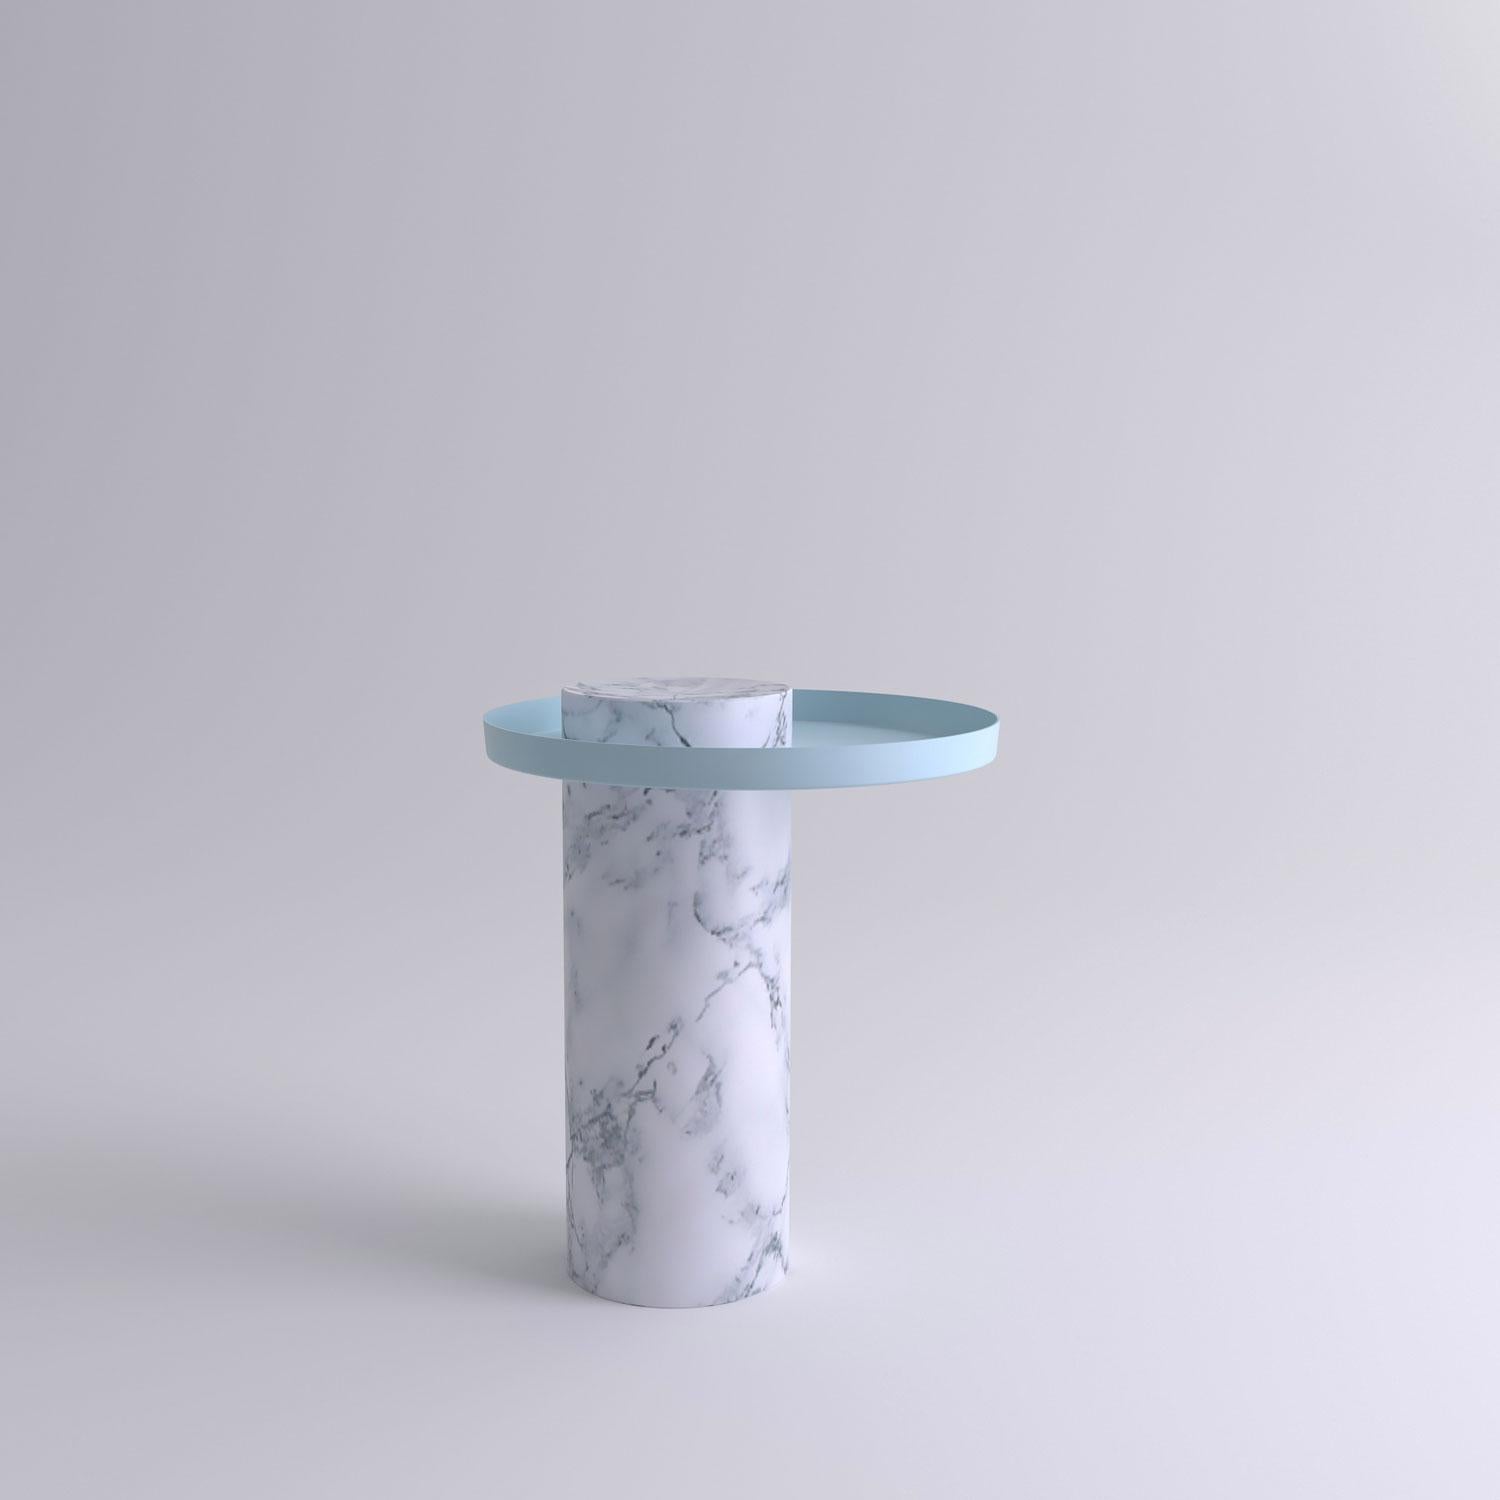 Medium white contemporary guéridon, Sebastian Herkner
Dimensions: D 40 x H 46 cm
Materials: Pele de Tigre marble, light blue metal tray

The salute table exists in 3 sizes, 4 different marble stones for the column and 5 different finishes for